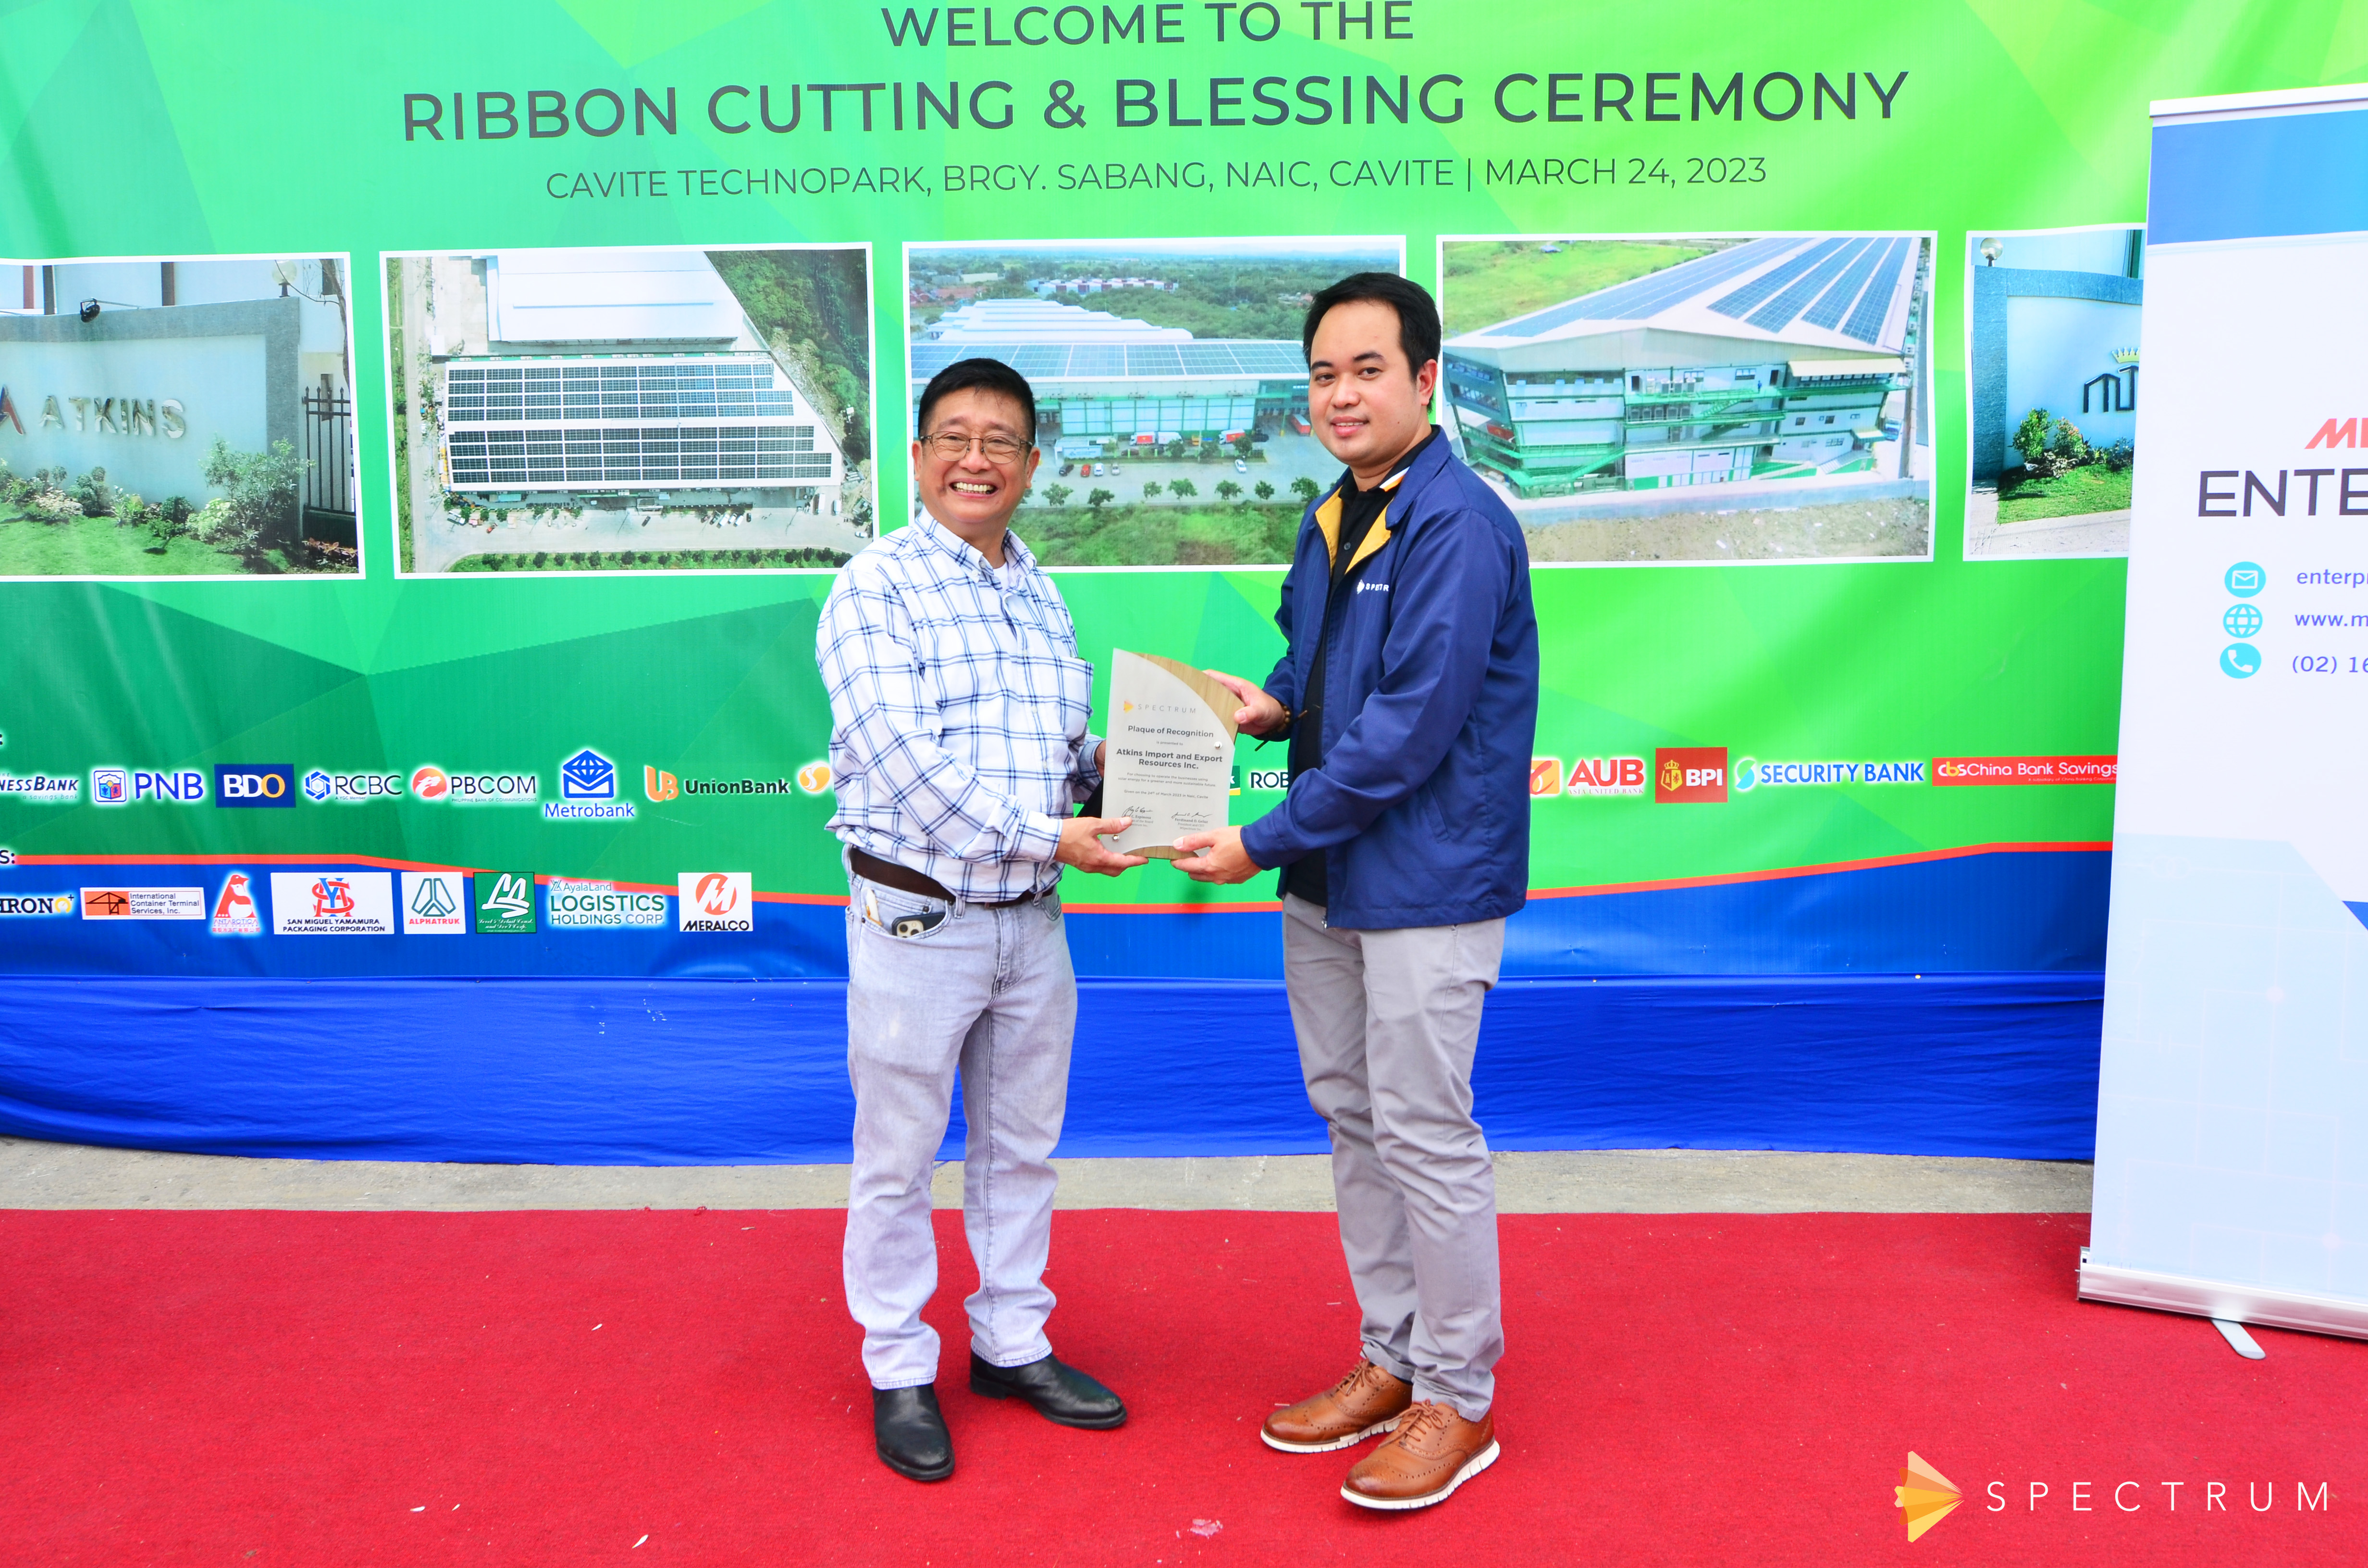 SPECTRUM ENERGIZES ATKINS’ LARGEST COLD STORAGE FACILITY IN SOUTH LUZON WITH A 976.8 KWP SOLAR INSTALLATION